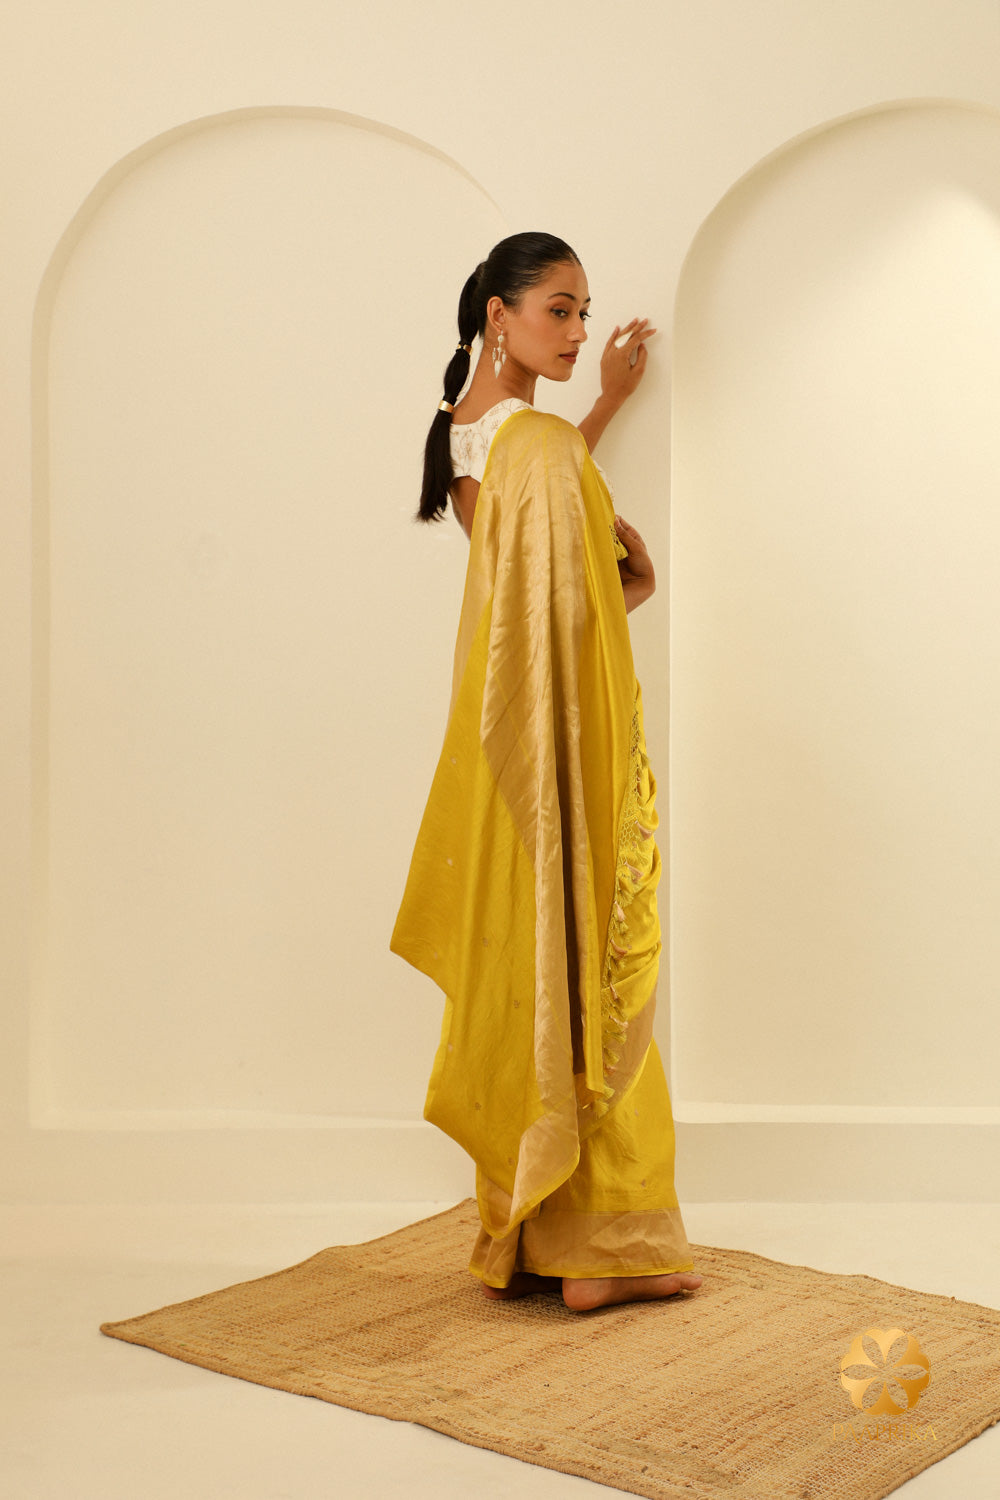 The premium Mashru silk fabric, used to craft the saree, emphasizing its visual appeal and comfort.